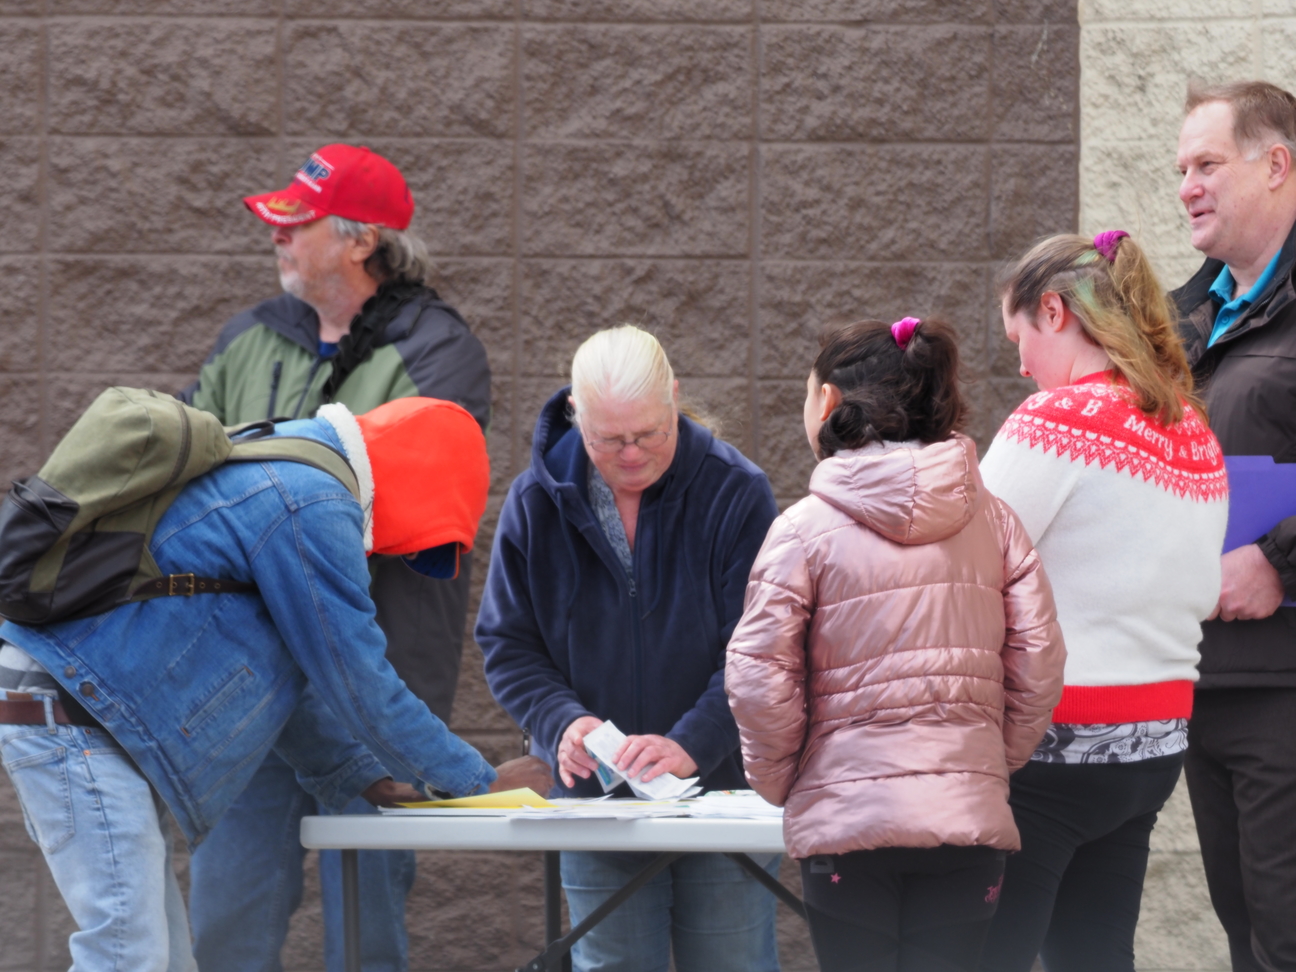 People congregating around a petition table